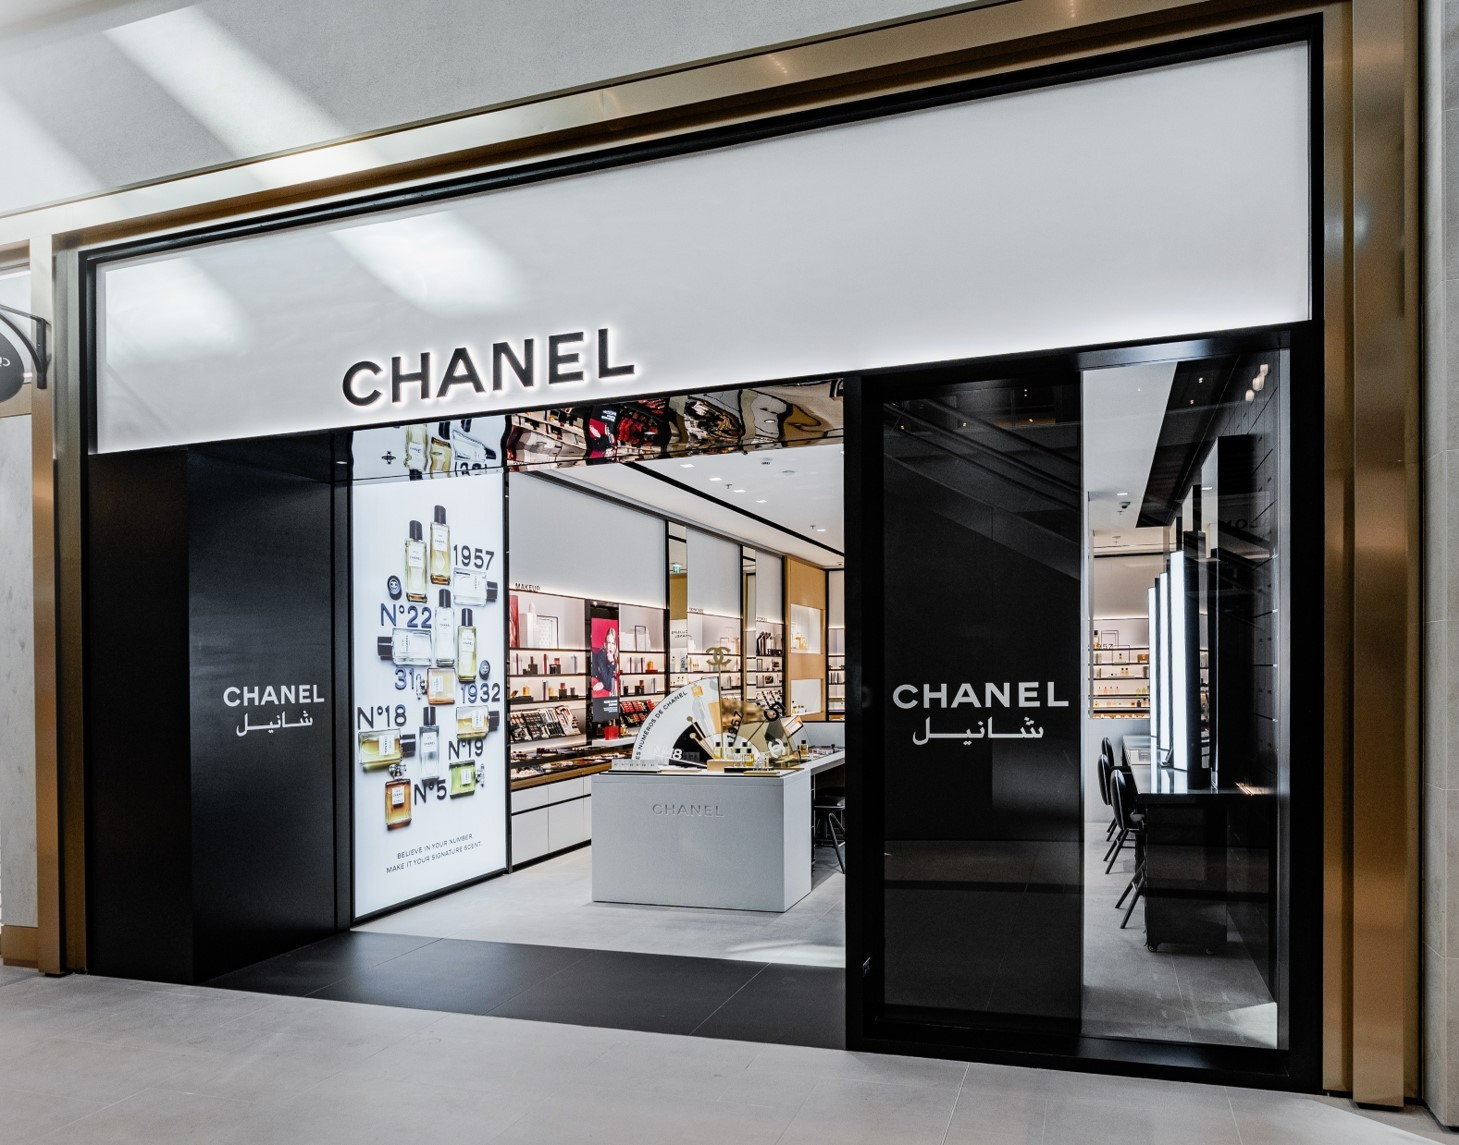 at ringe Let at læse dårligt Chanel Opens A New Beauty Boutique in the UAE - A&E Magazine